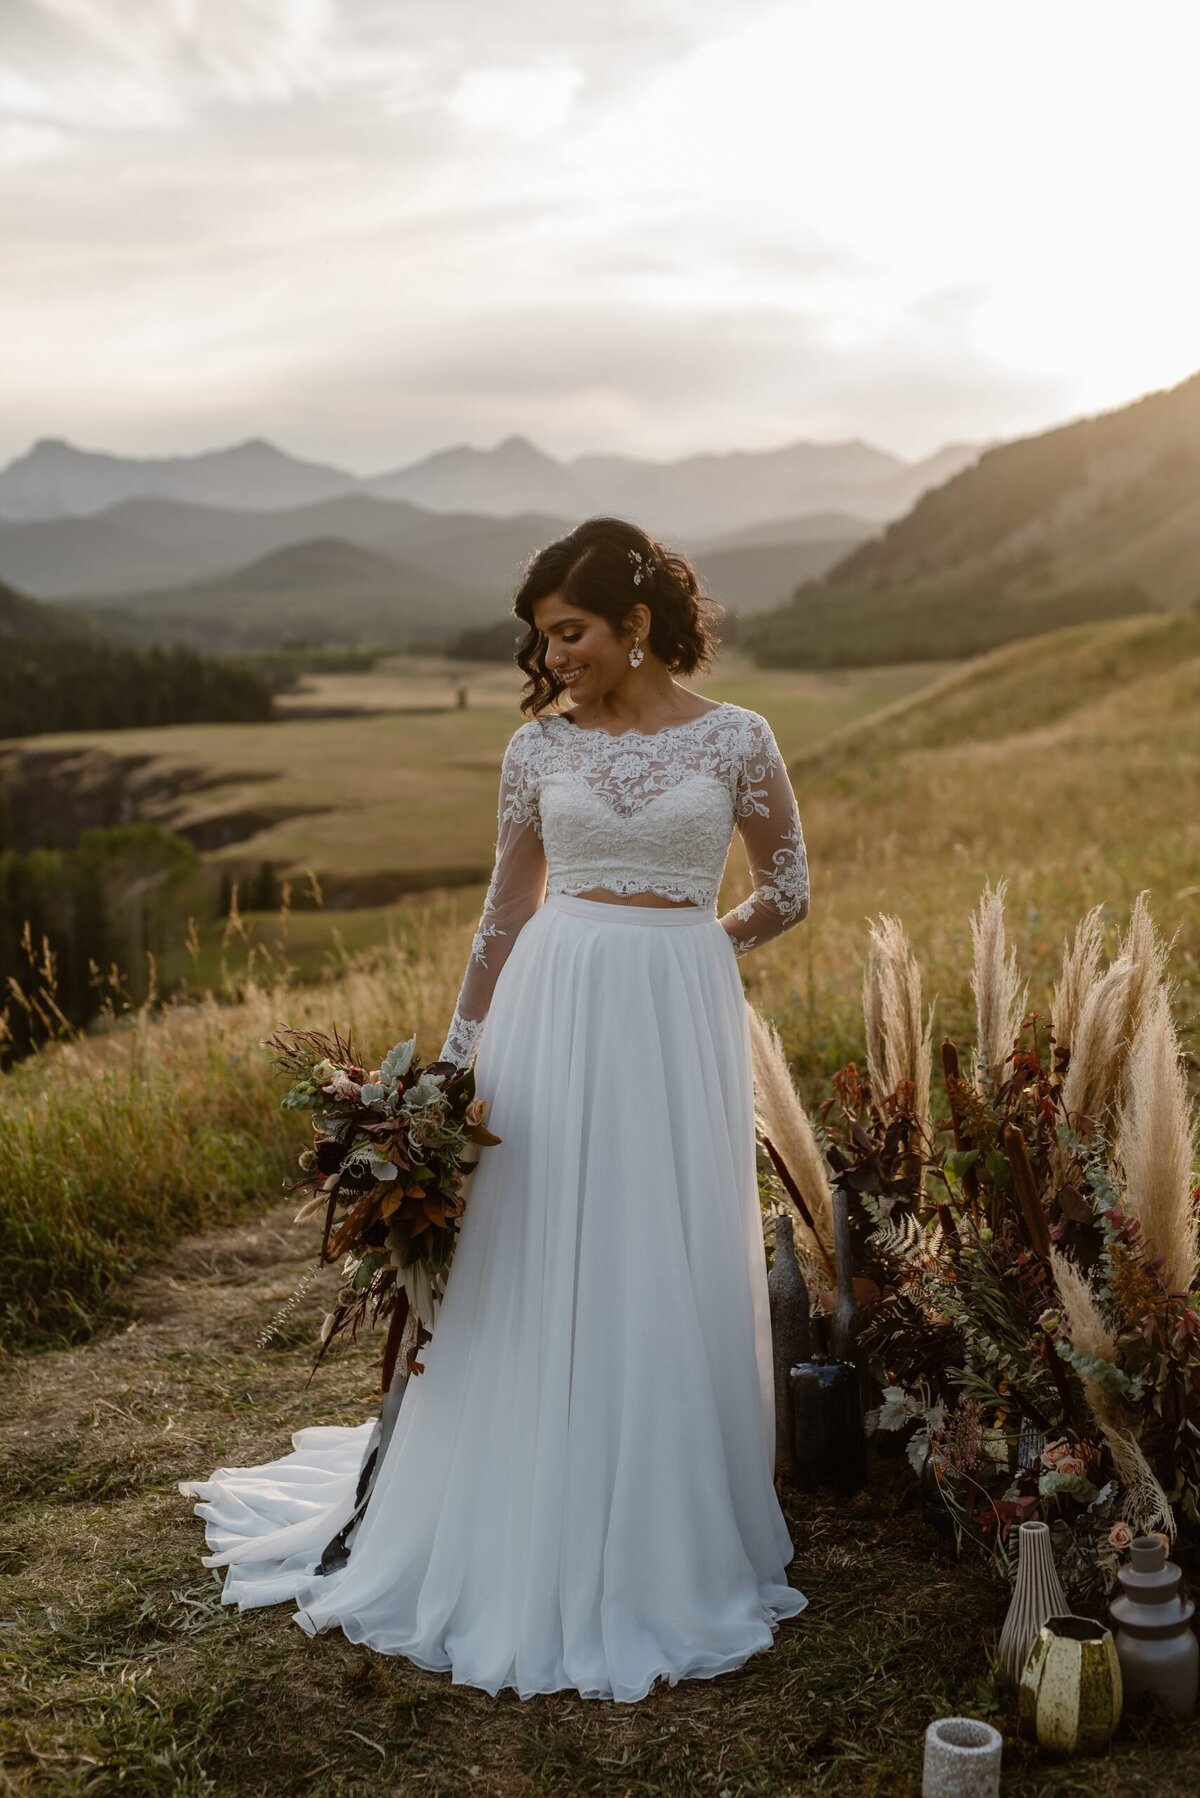 Stunning two piece lace bridal gown from Cameo & Cufflinks, a contemporary bridal boutique based in Calgary, Alberta. Featured on the Brontë Bride Vendor Guide.